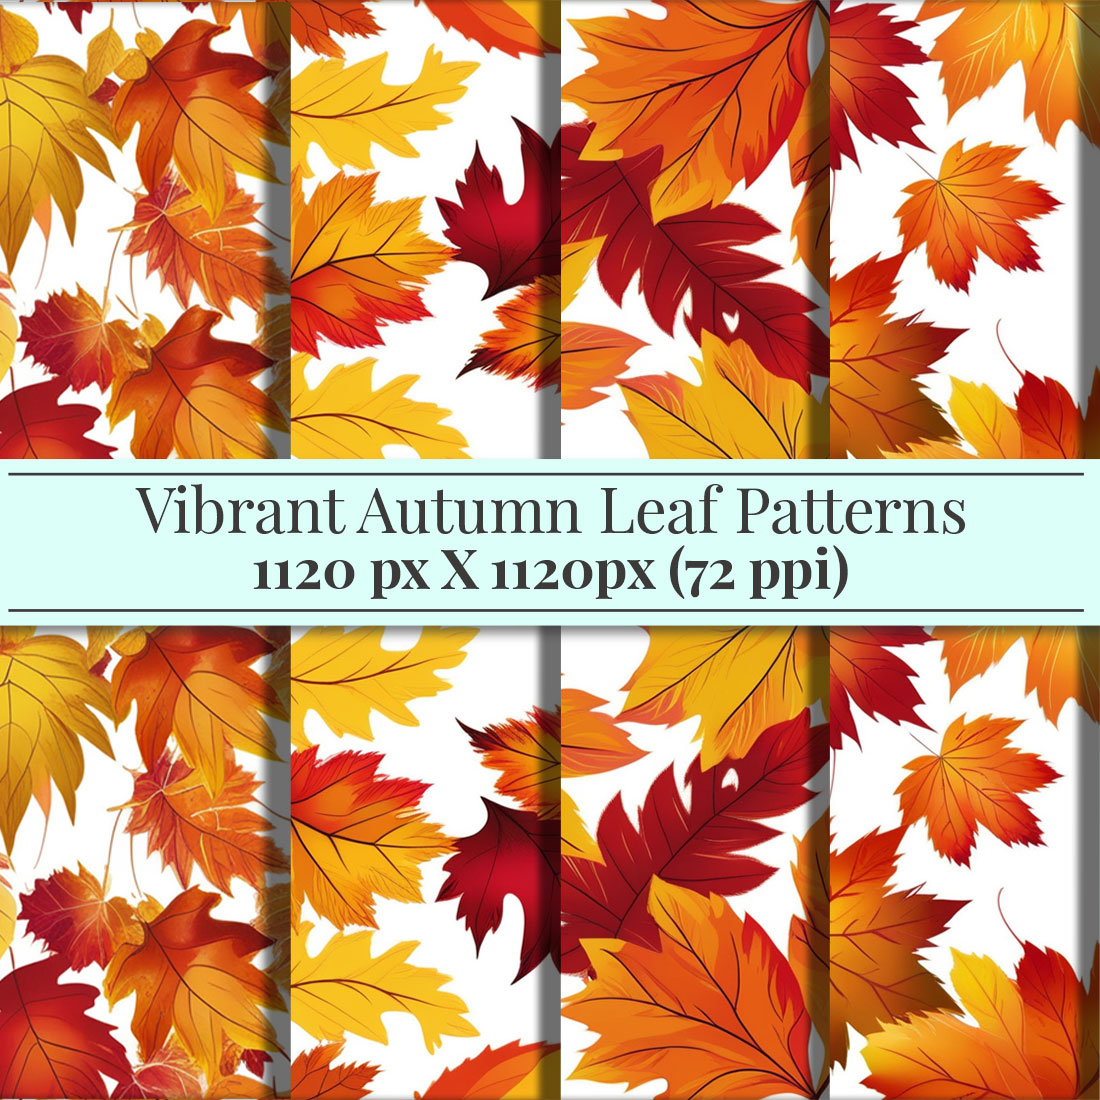 Vibrant Autumn Leaf Patterns Digital Paper Bundle - Seamless Fall Leaves in Warm Earthy Tones cover image.